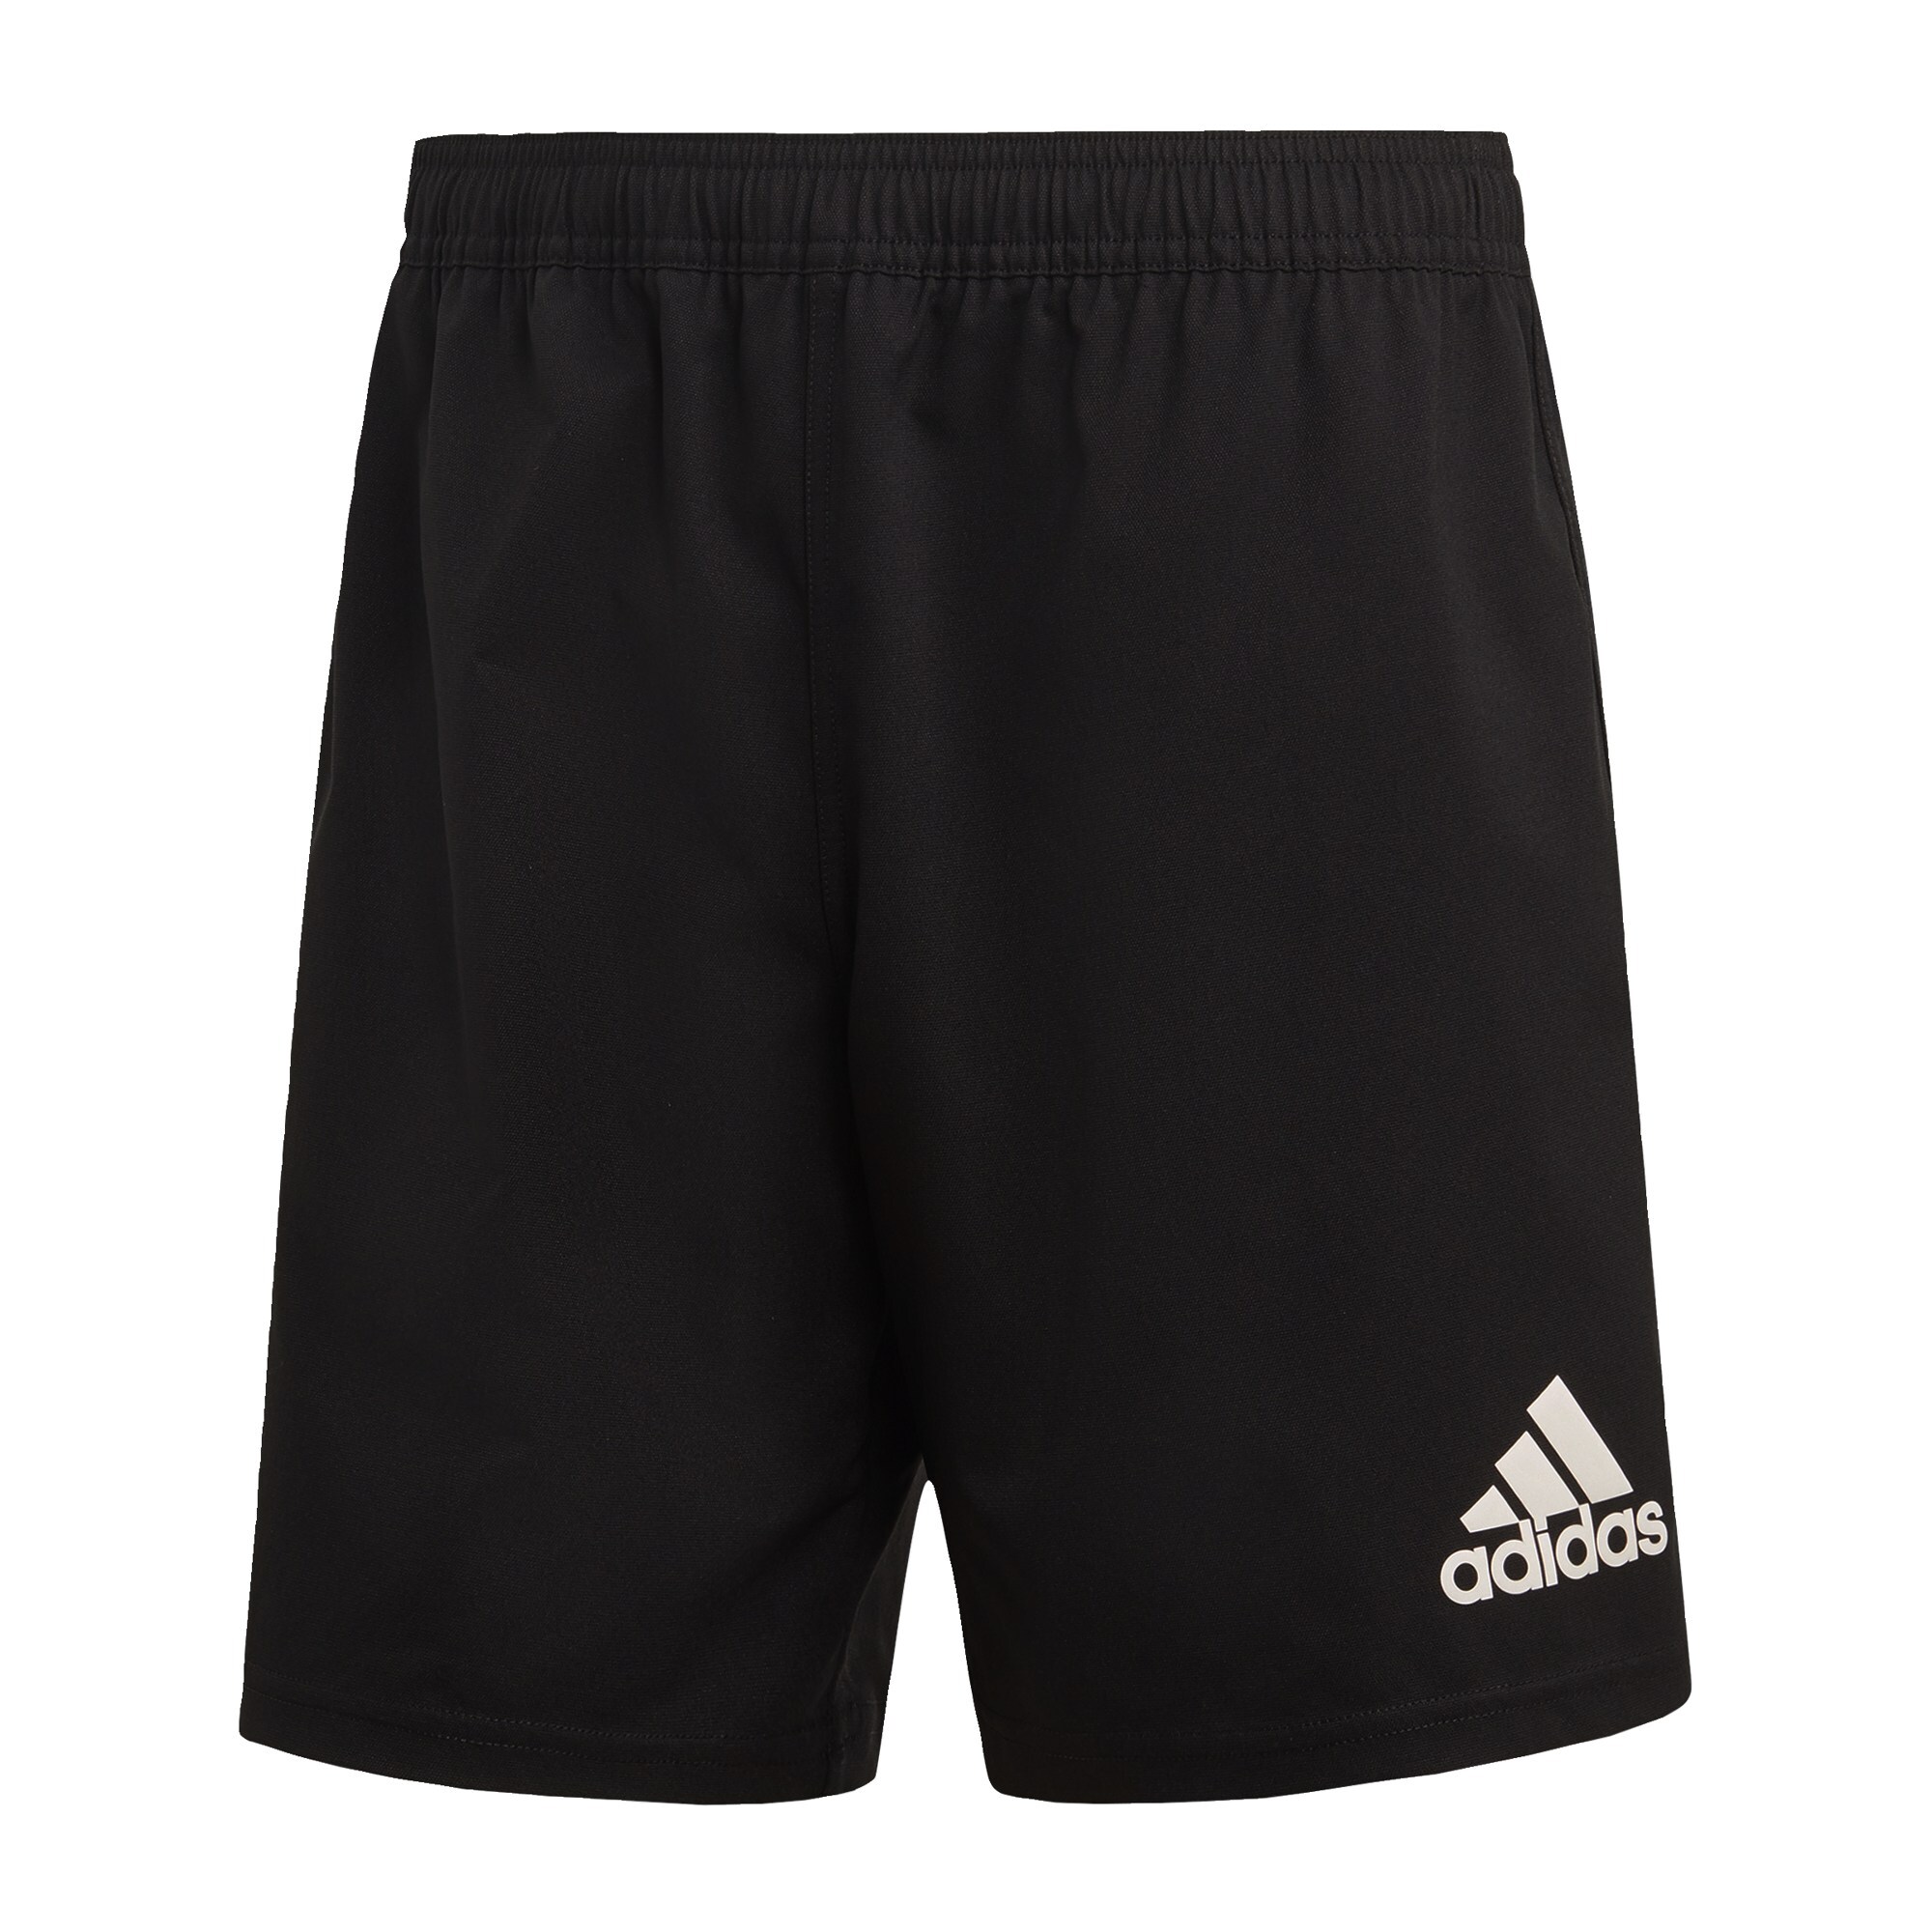 adidas 3 Stripe Shorts | Pro:Direct Rugby